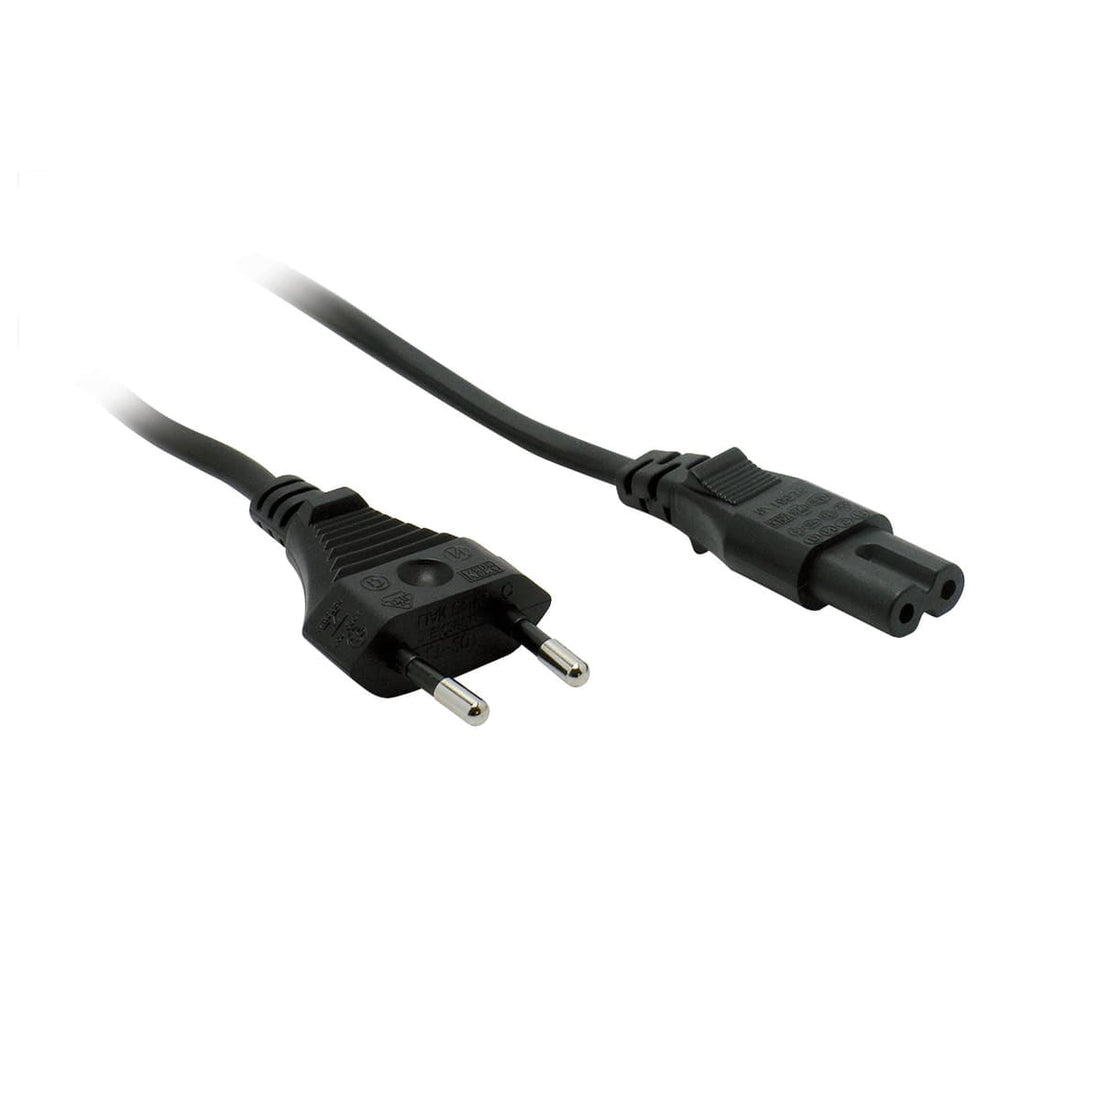 POWER CABLE 1.5MT - best price from Maltashopper.com BR420992295